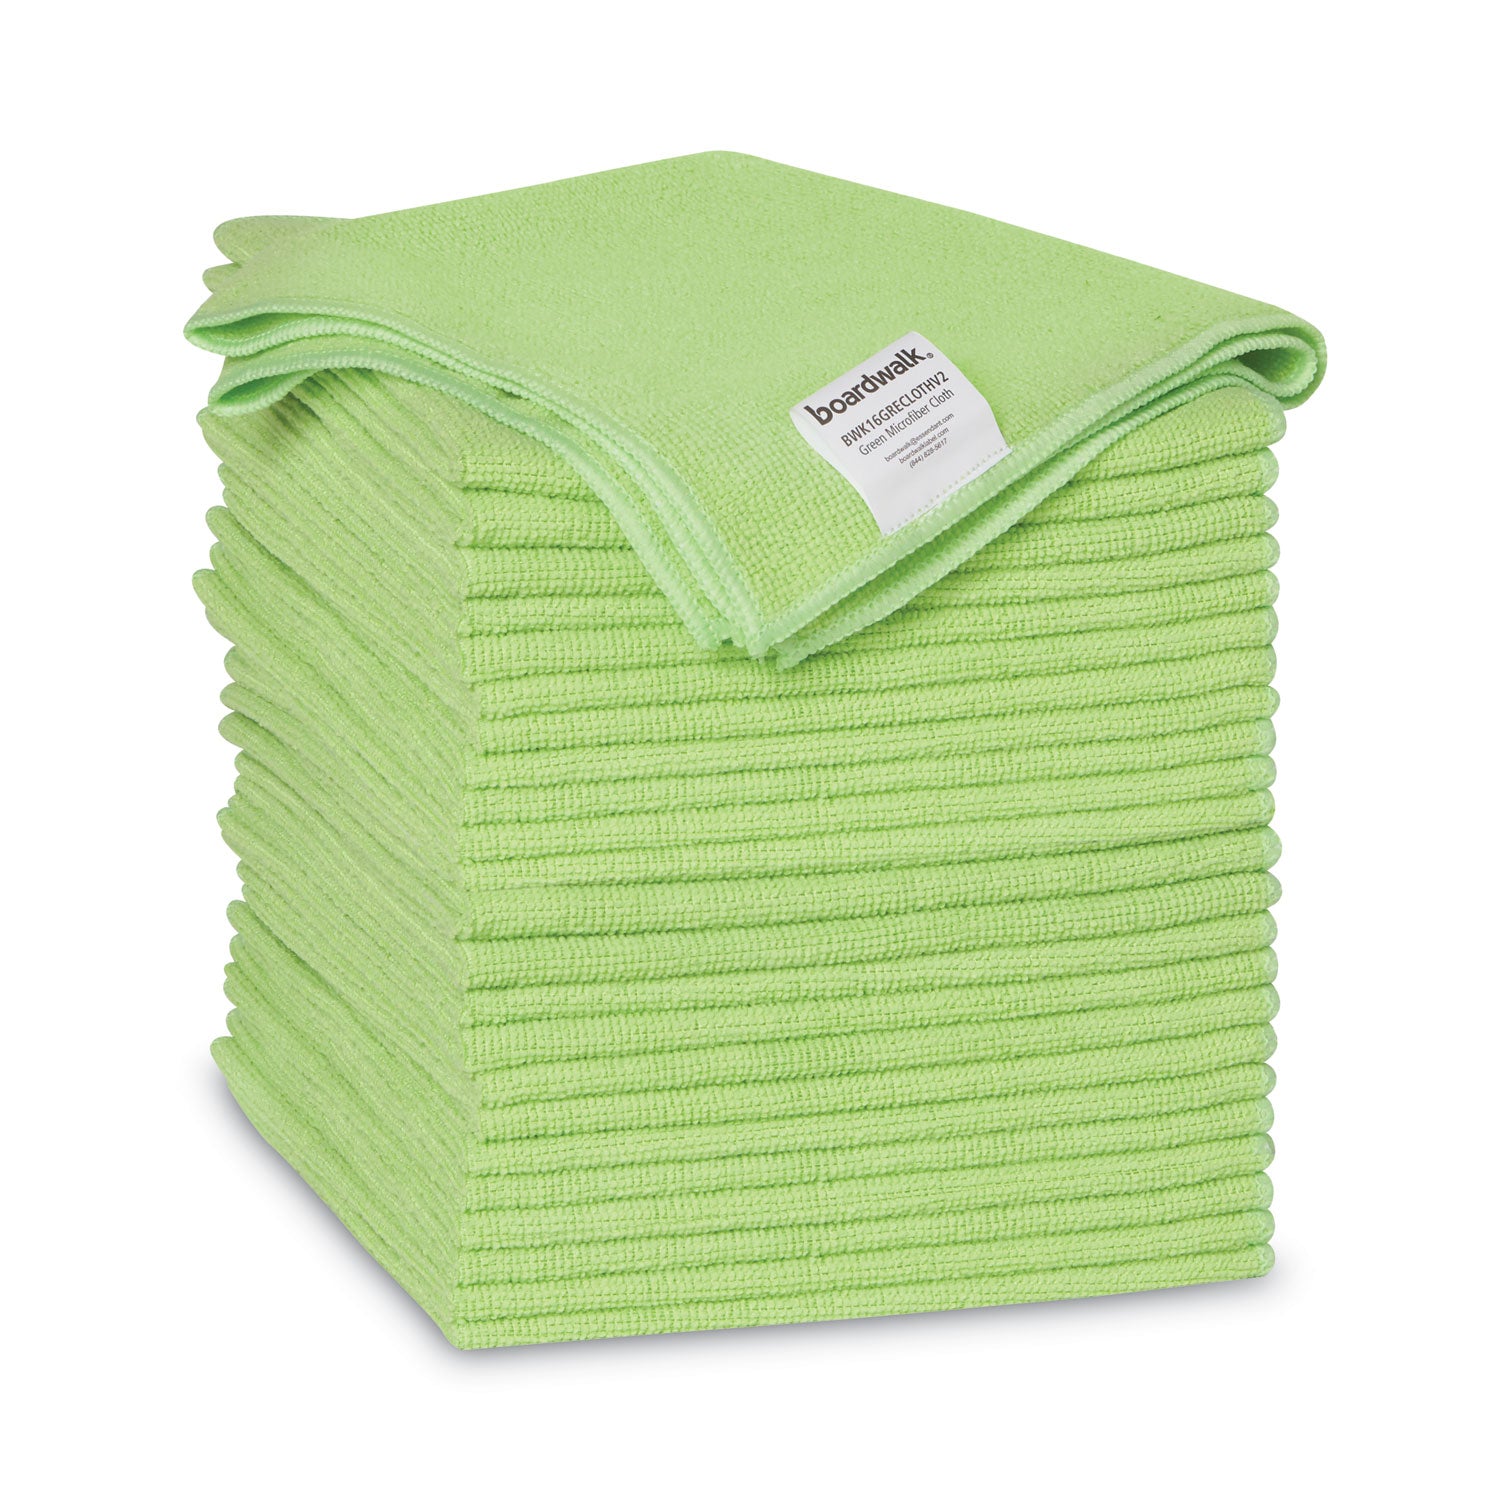 Microfiber Cleaning Cloths, 16 x 16, Green, 24/Pack - 4